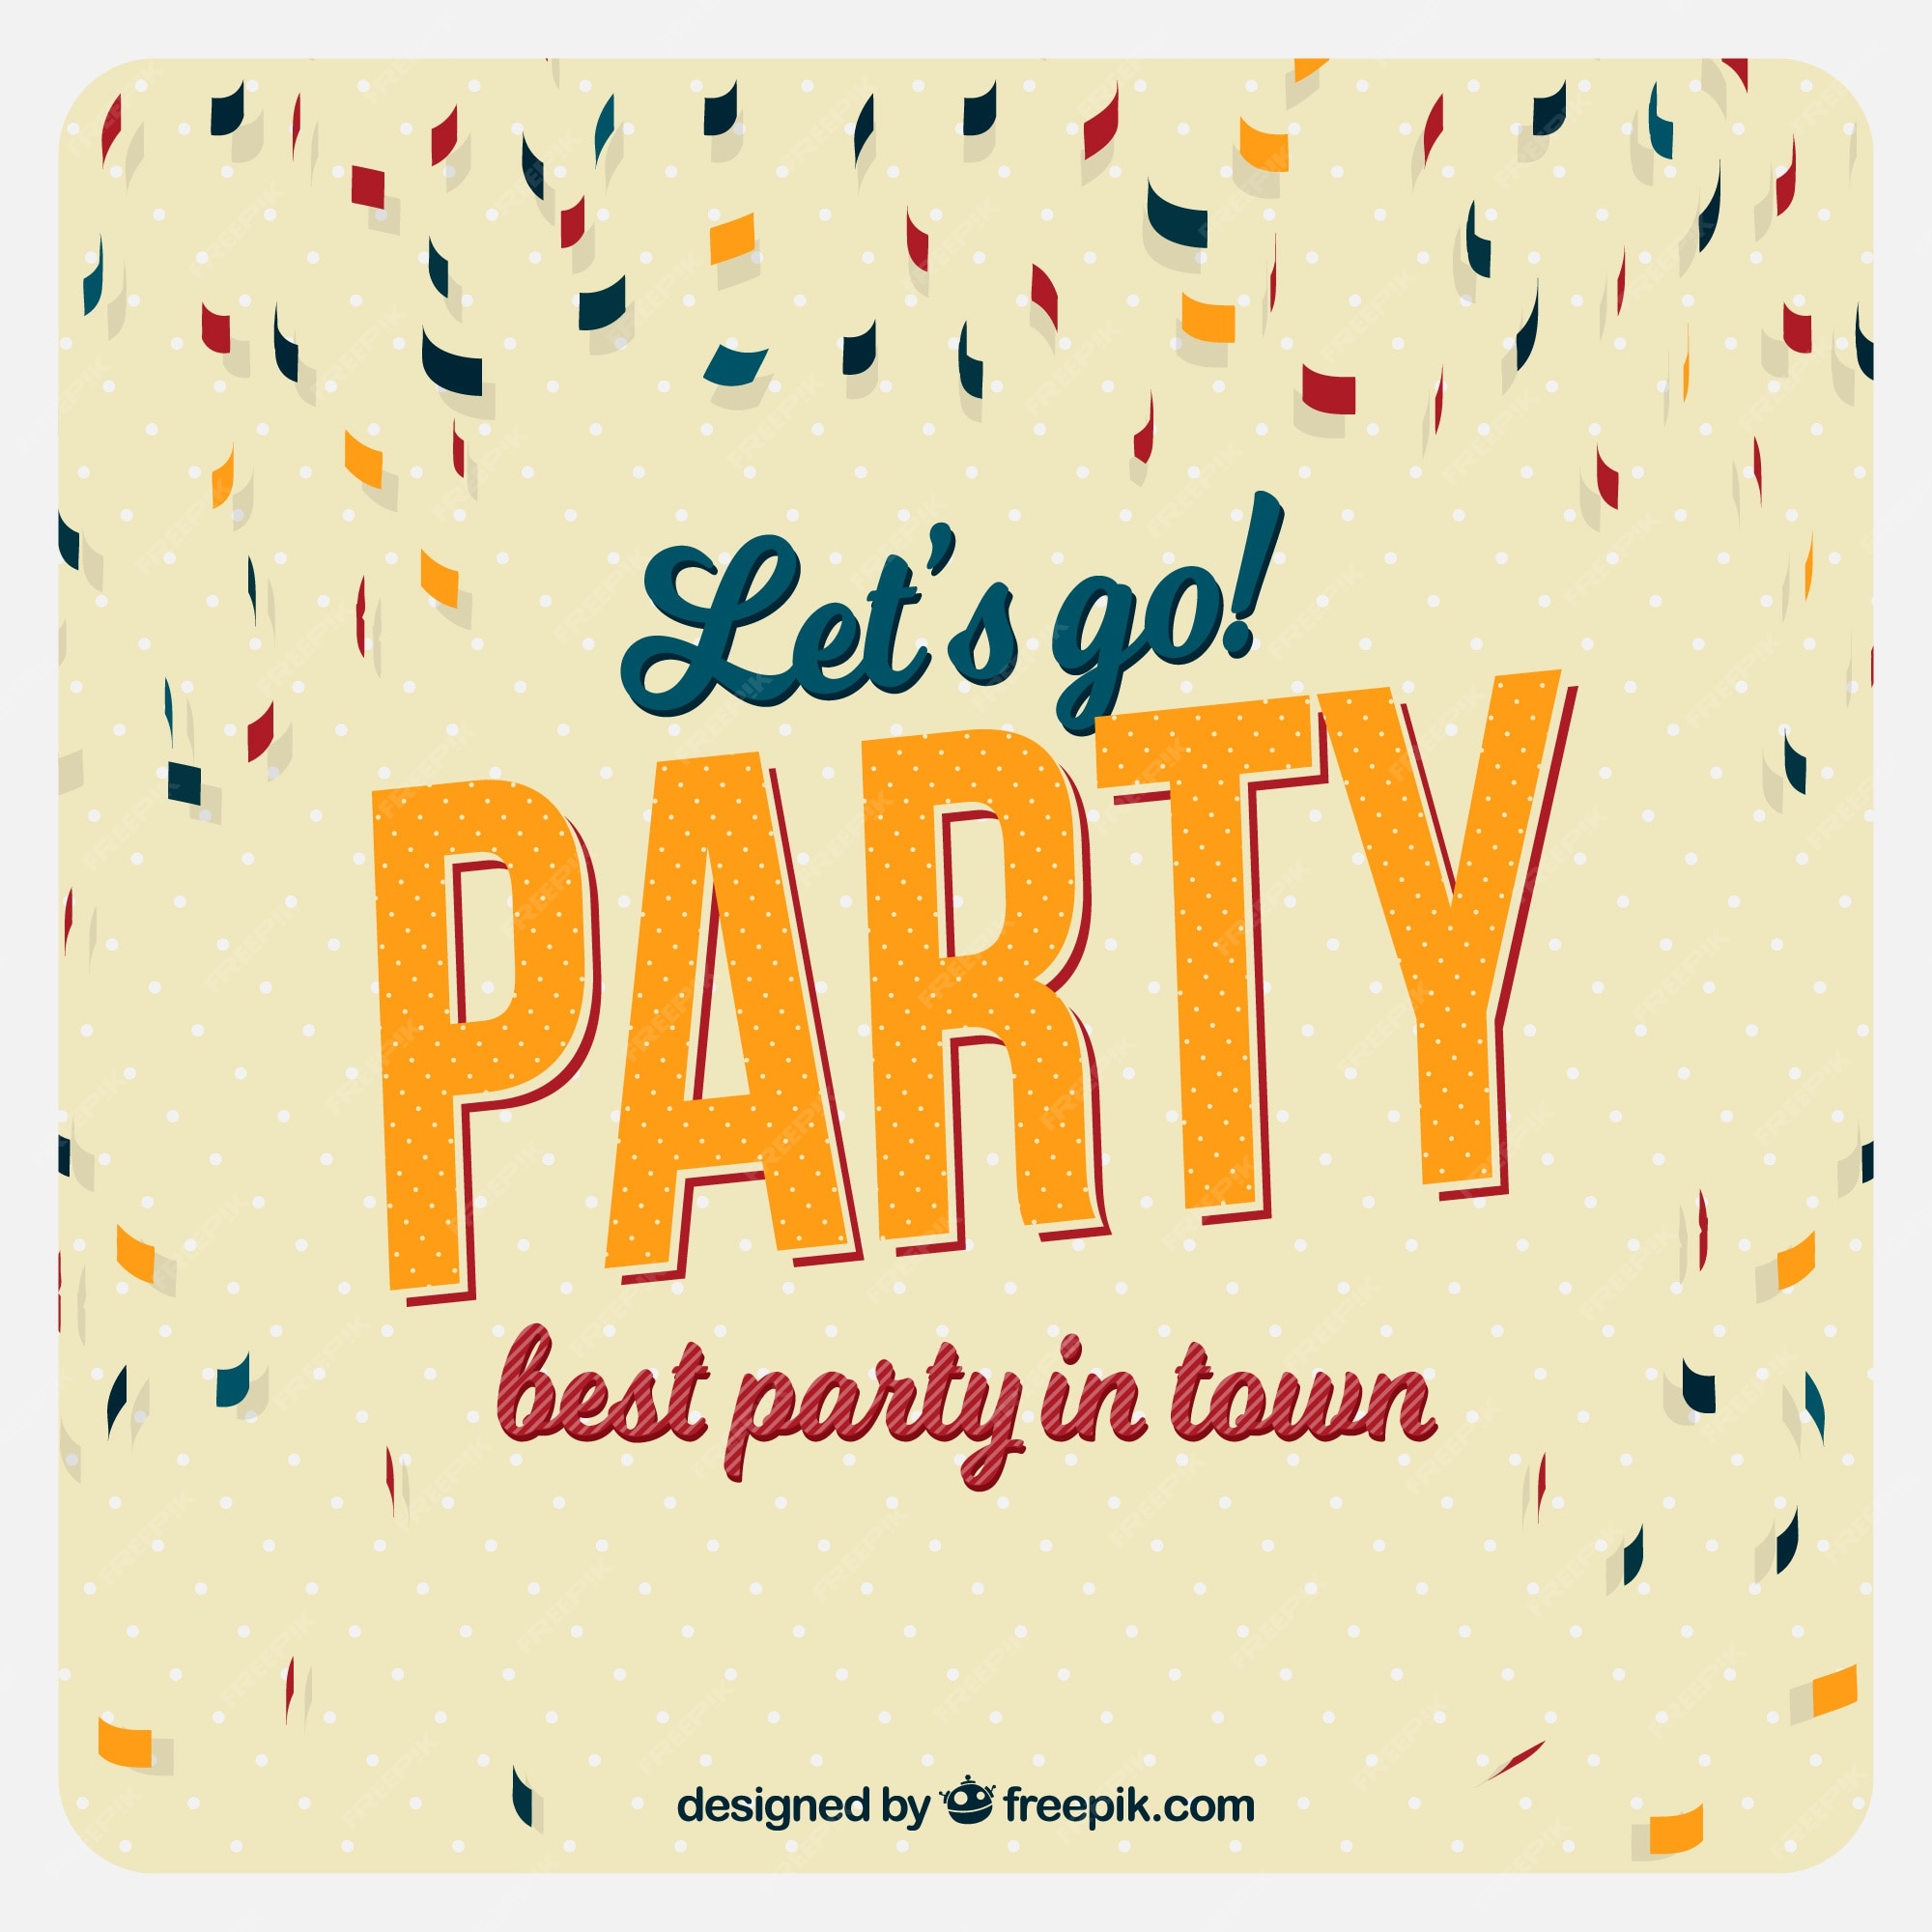 Farewell party Vectors & Illustrations for Free Download | Freepik